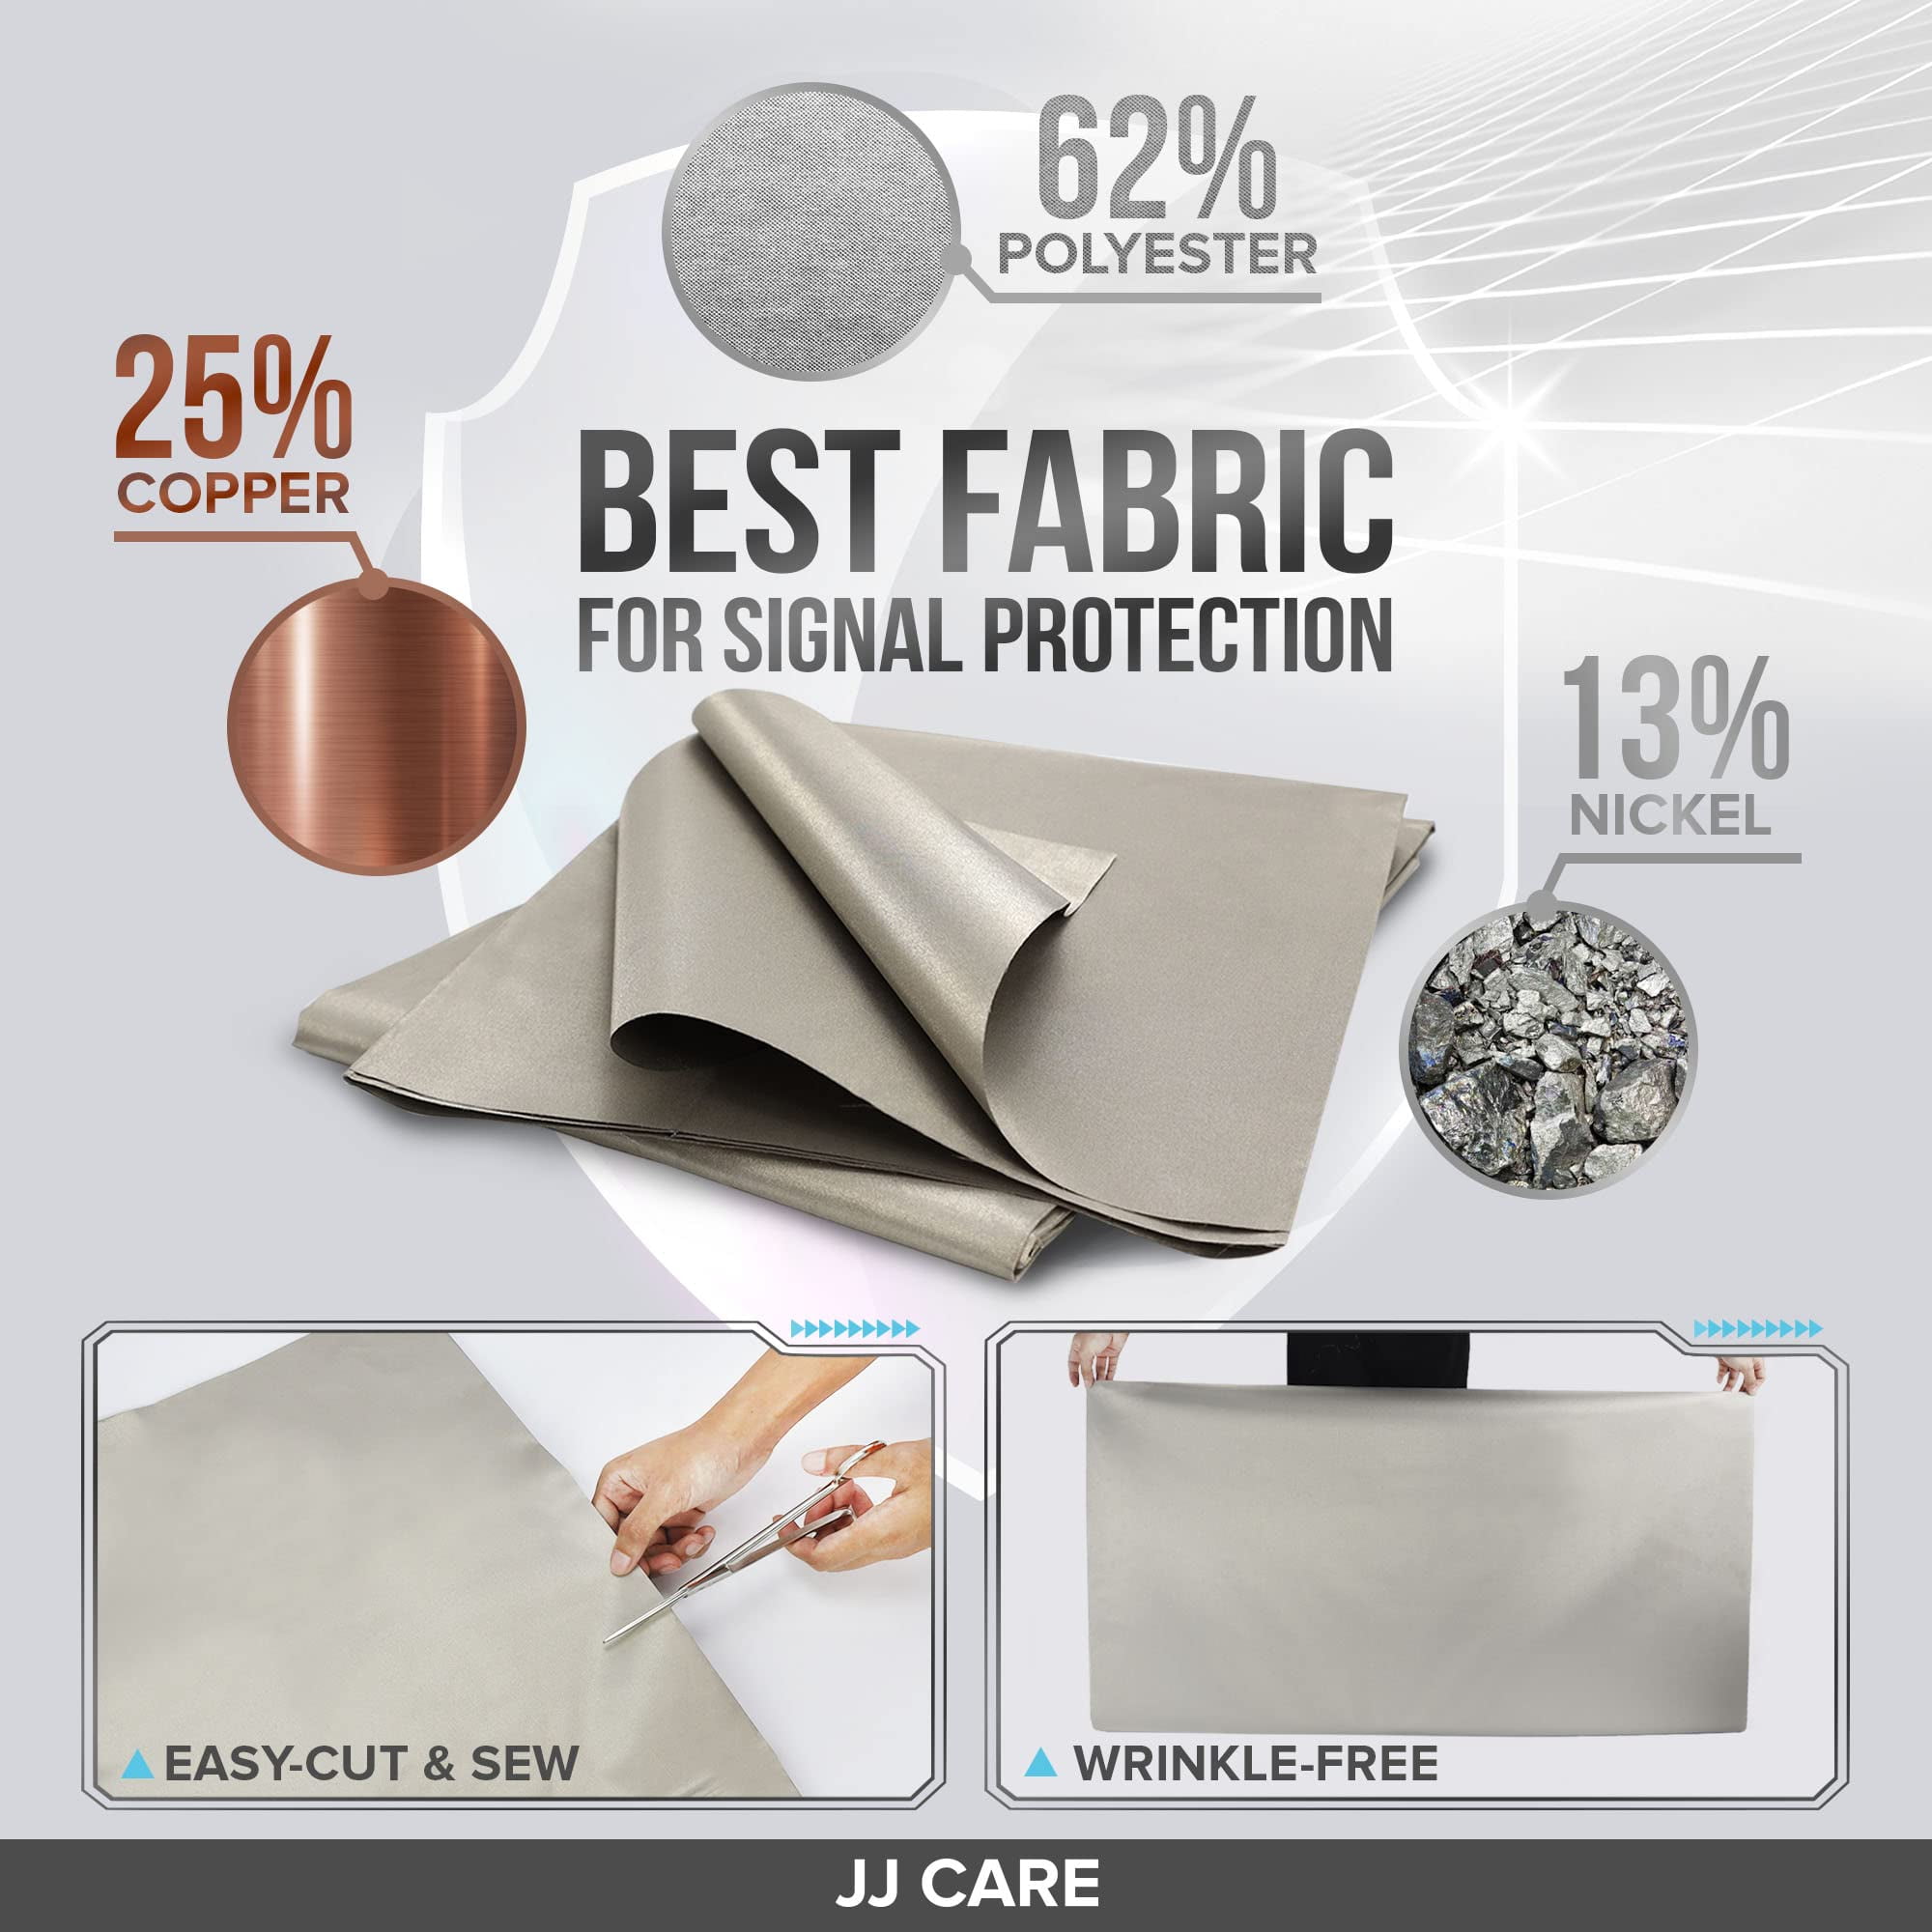 JJ Care Faraday Fabric [Pack of 1, 44 inch x 39 inch Faraday Cloth + 1 inch x 24 inch Long Faraday Tape + Instructions] - Military Grade Shielding